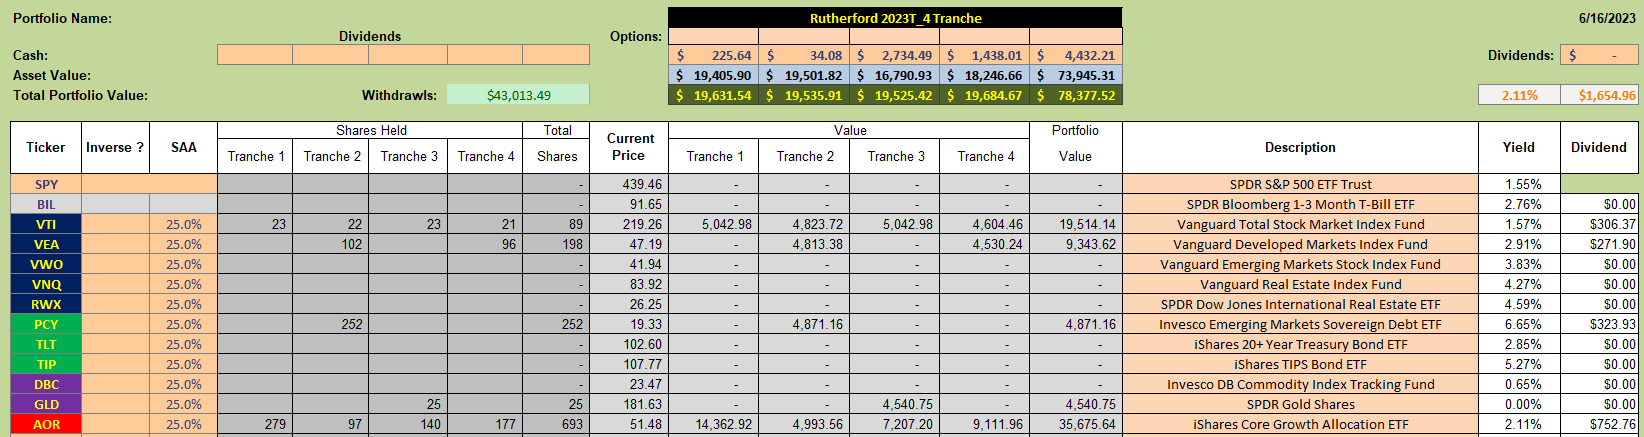 Rutherford Portfolio Review (Tranche 3): 16 June 2023 4